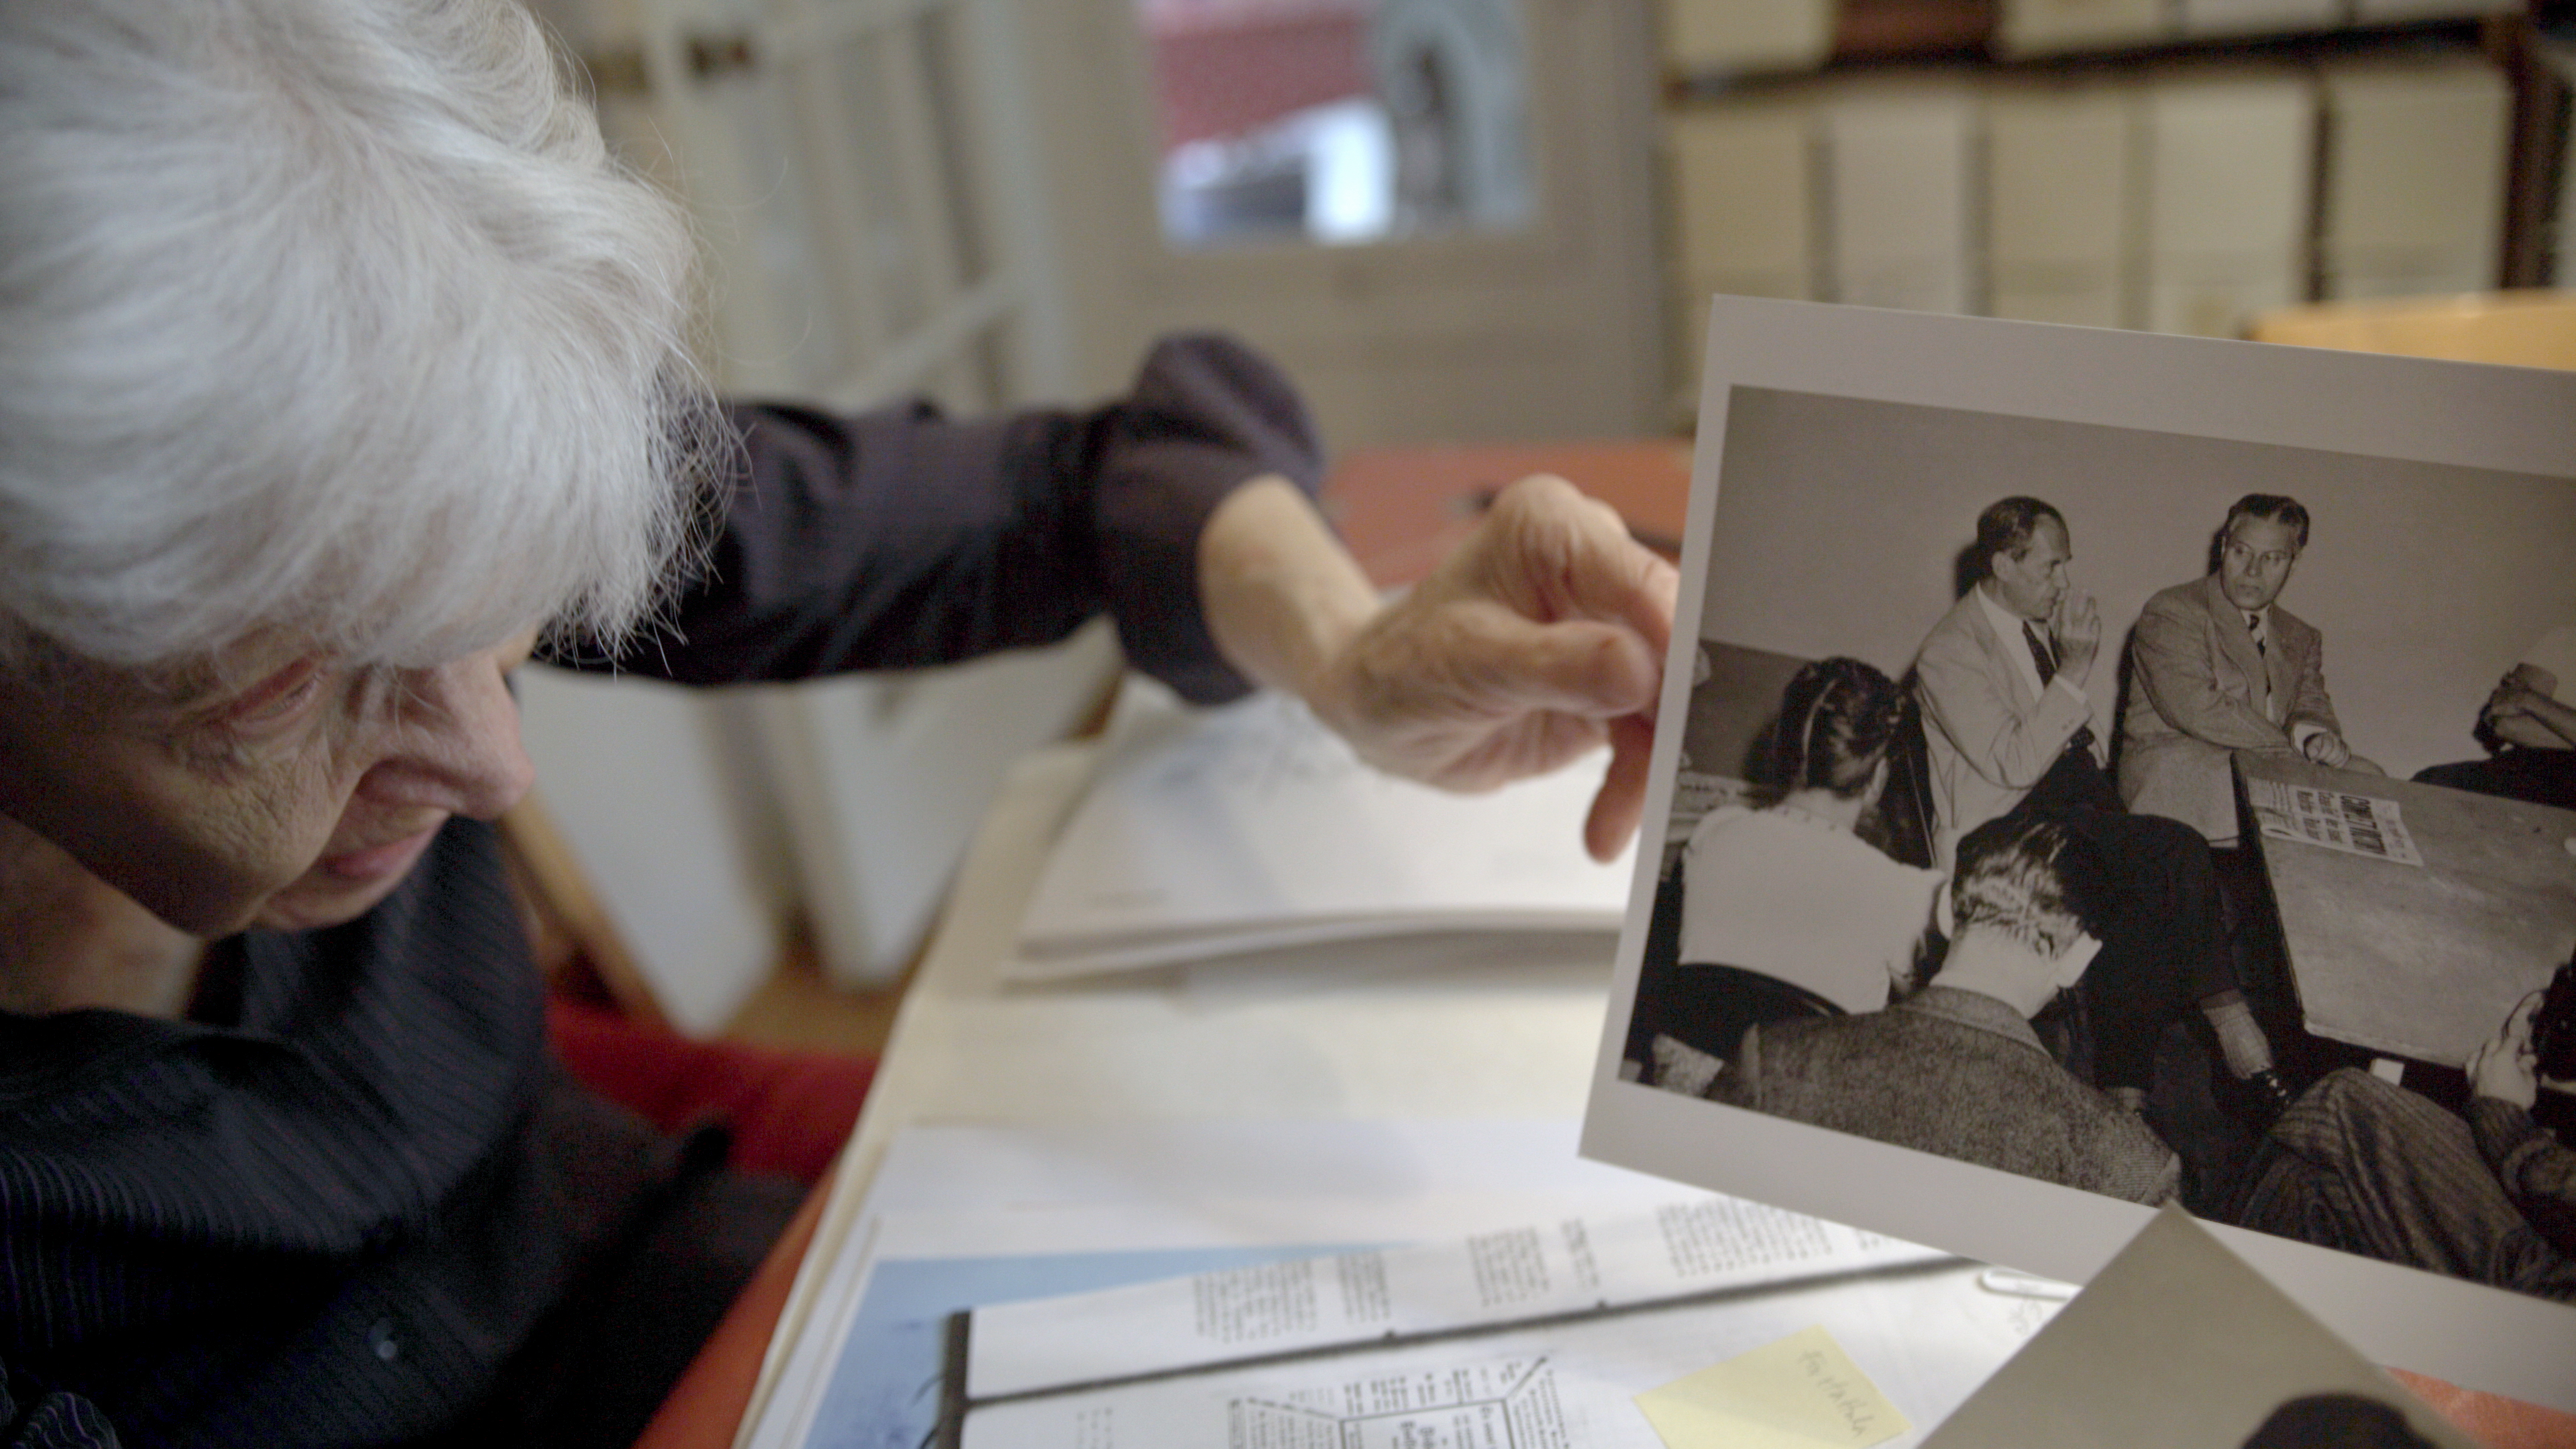 Hattula Moholy-Nagy with a photograph of her father and Walter Gropius, still from The New Bauhaus, courtesy of Opendox, director: Alysa Nahmias, photographer: Petter Ringbom